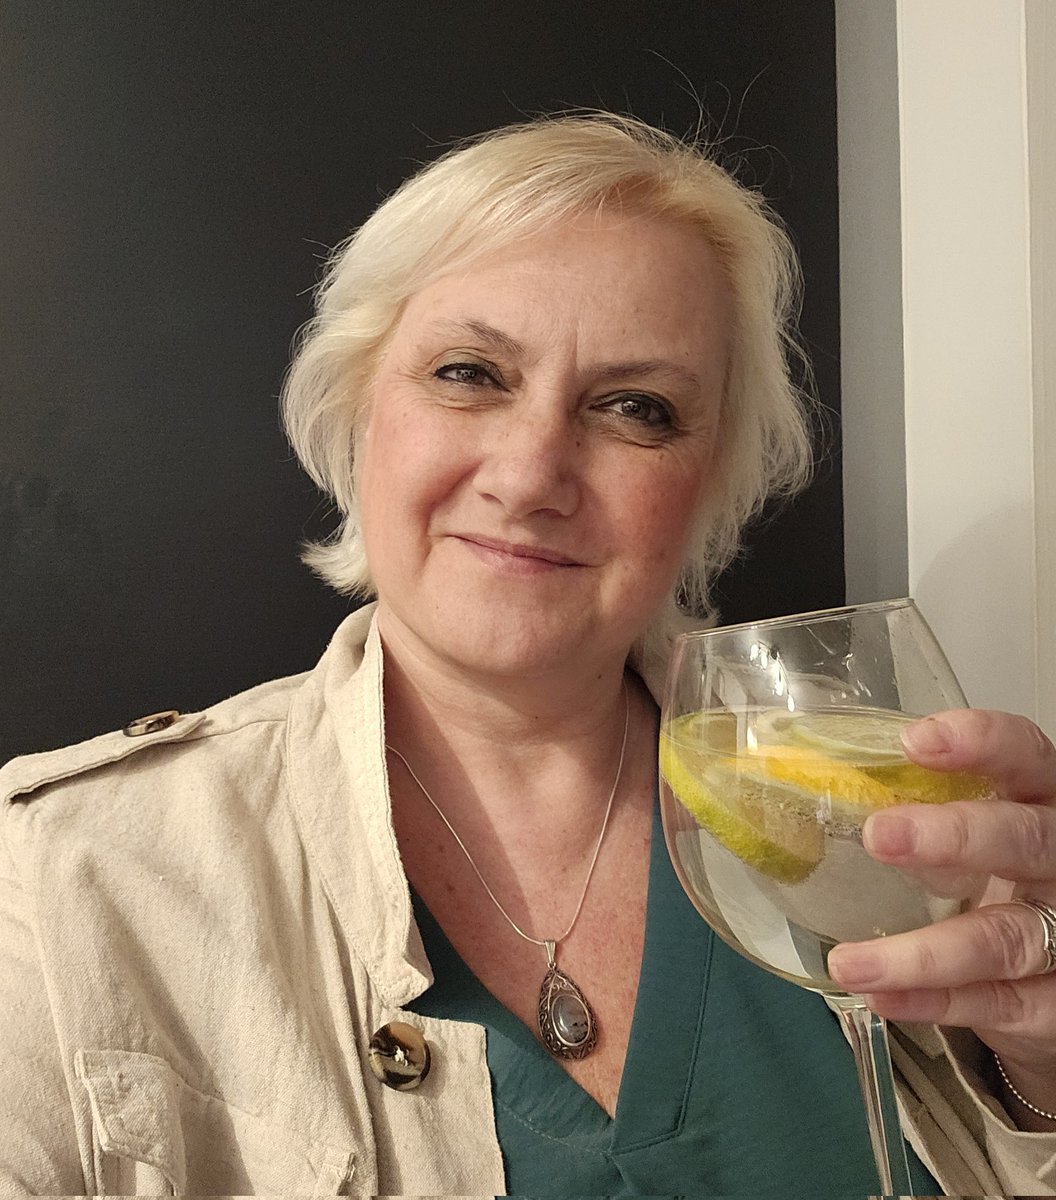 In this utterly twatwaffling laughably chaotic society of bonkeroonie cockwombles and irritating bullshittery, I wish you a pleasant evening of blocking the trolls and drinking gin, or whatever your tipple is 😘